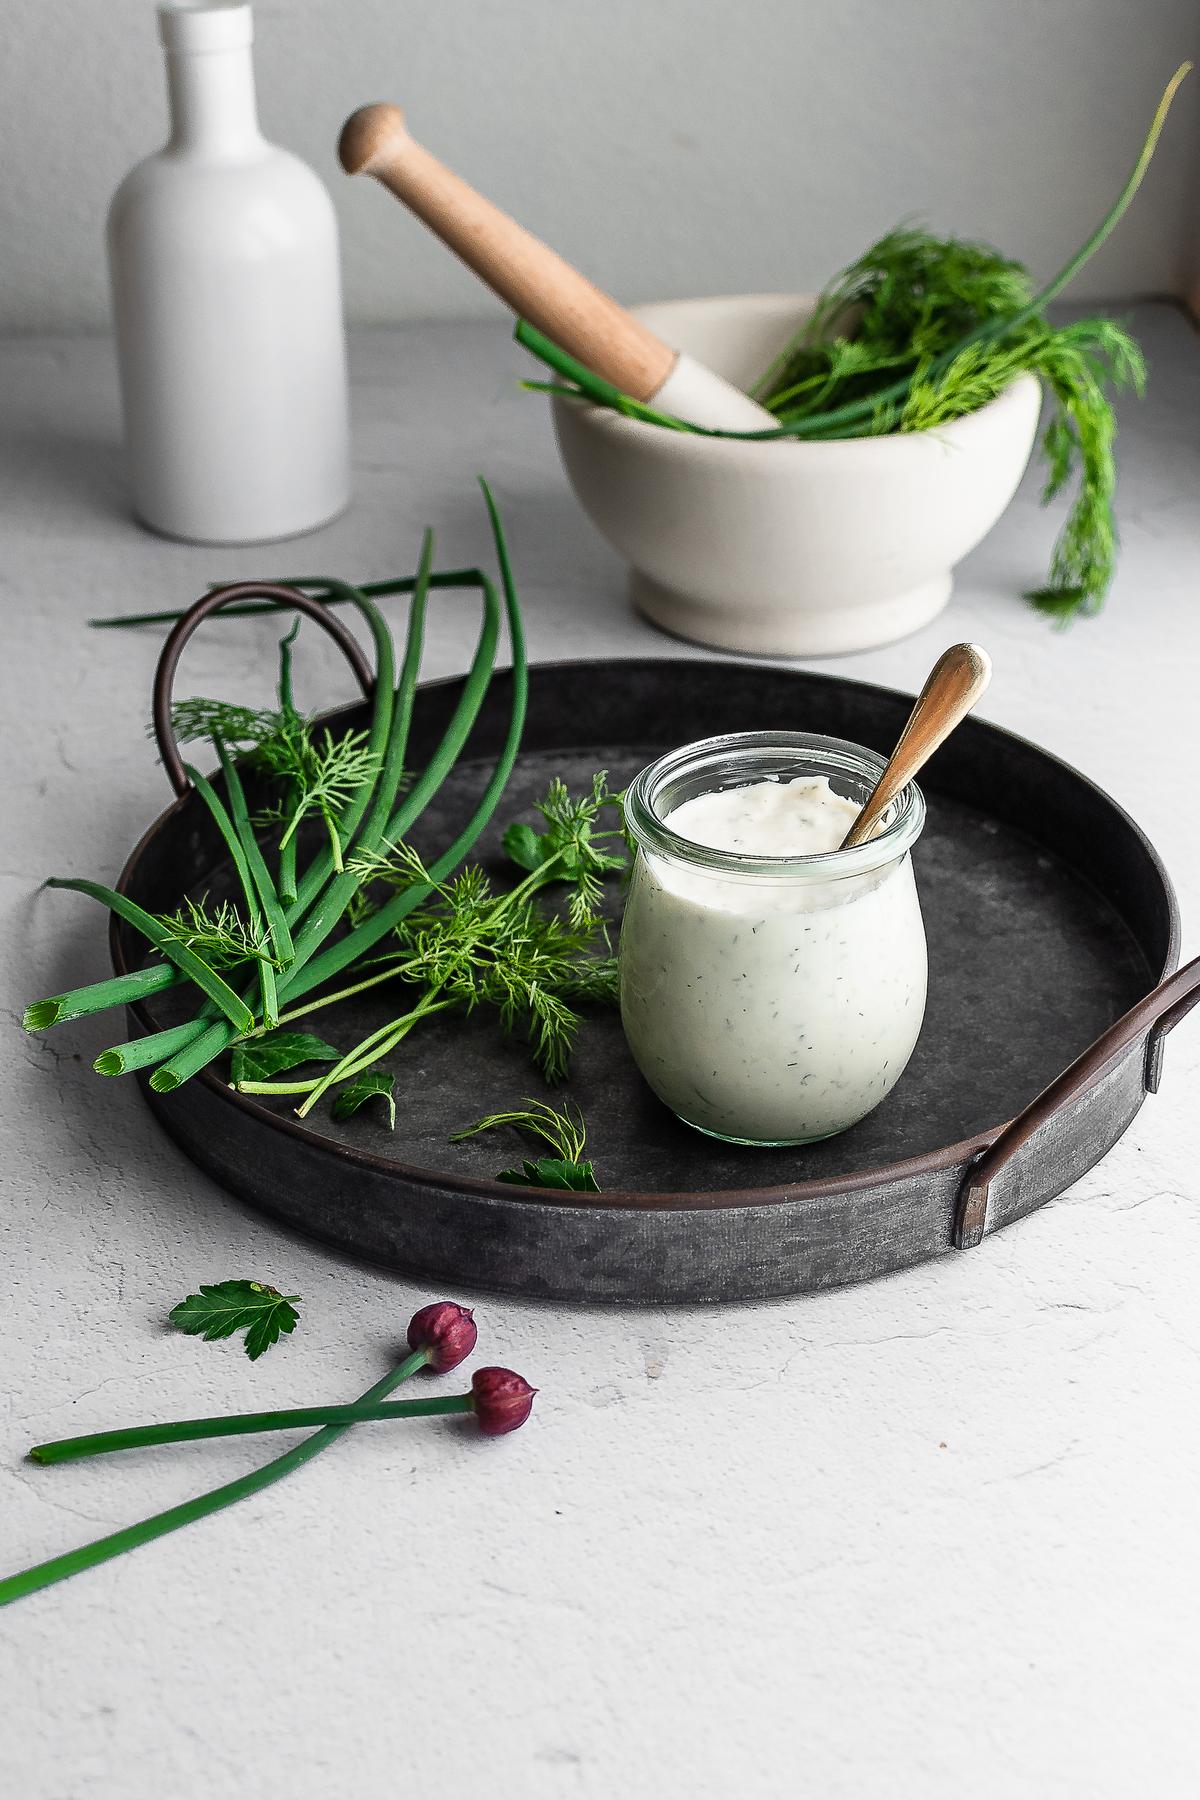 Creamy and tart with plenty of herbs, this take on classic ranch dressing gets a boost of probiotic goodness, thanks to the inclusion of milk kefir. (Jennifer McGruther)